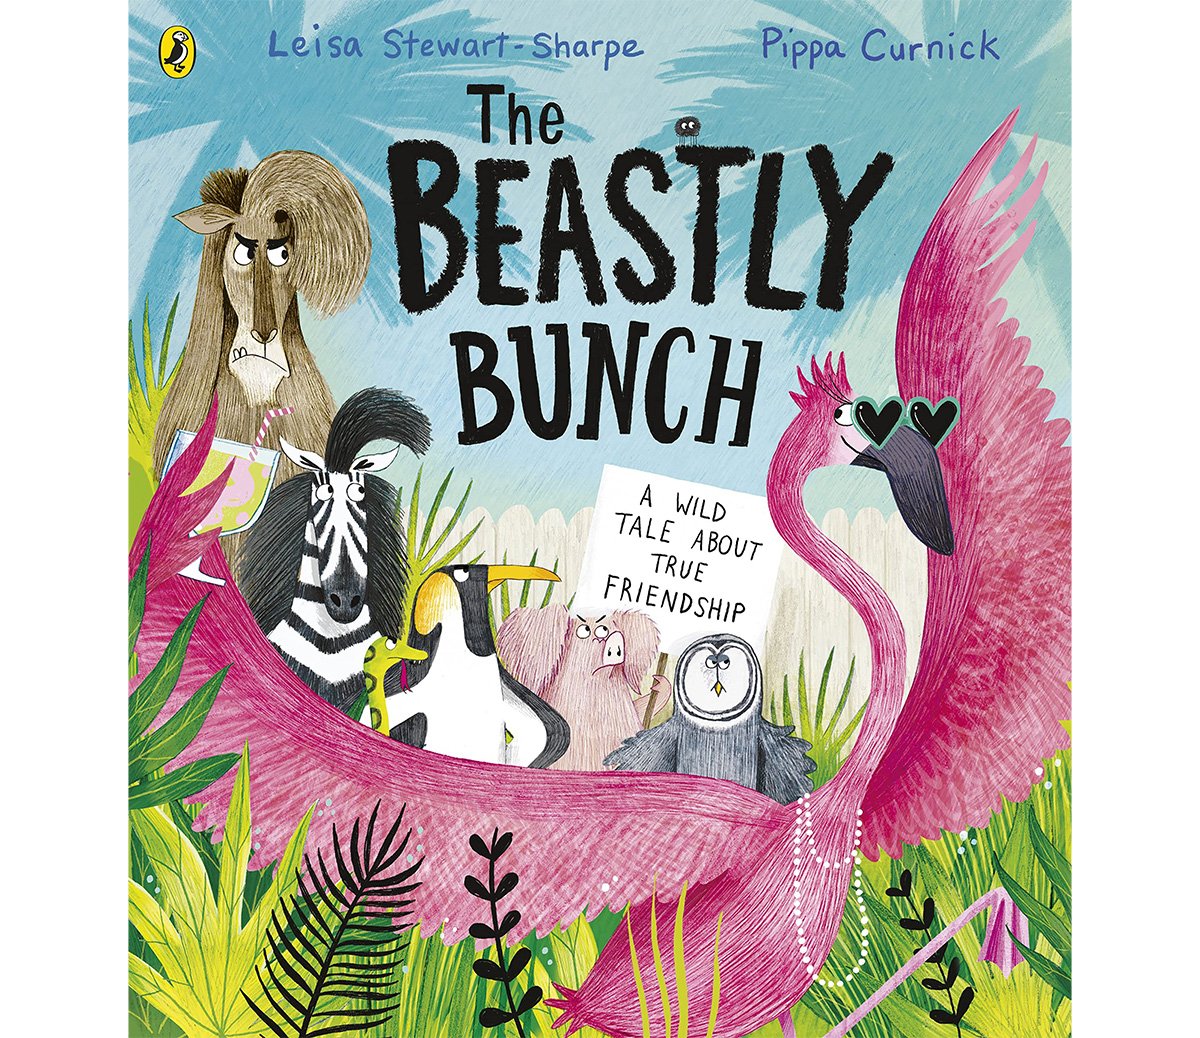 pippa-curnick-beastly-bunch-cover-illustration.jpg